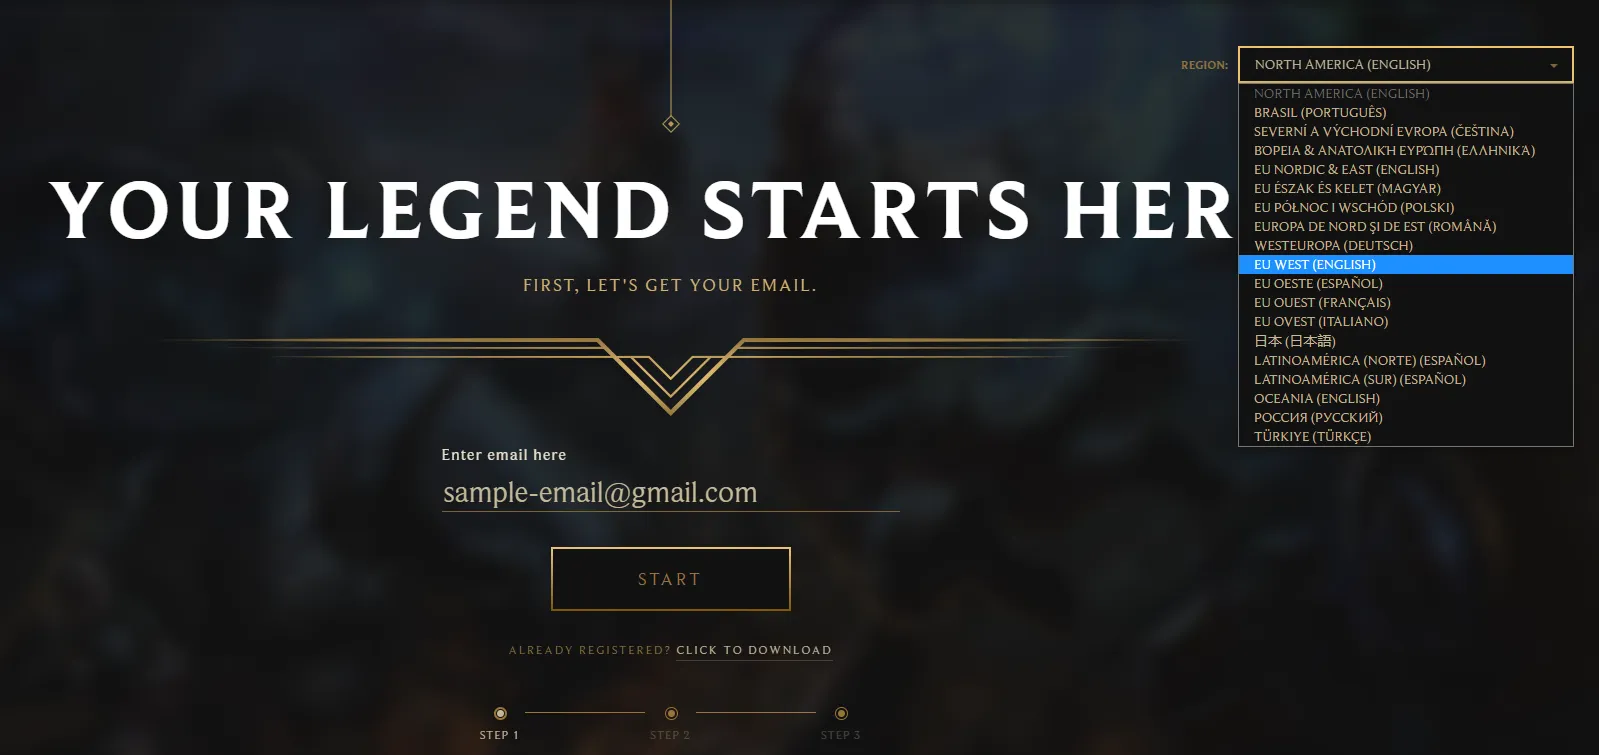 The Riot Games website asking for your email and server location.